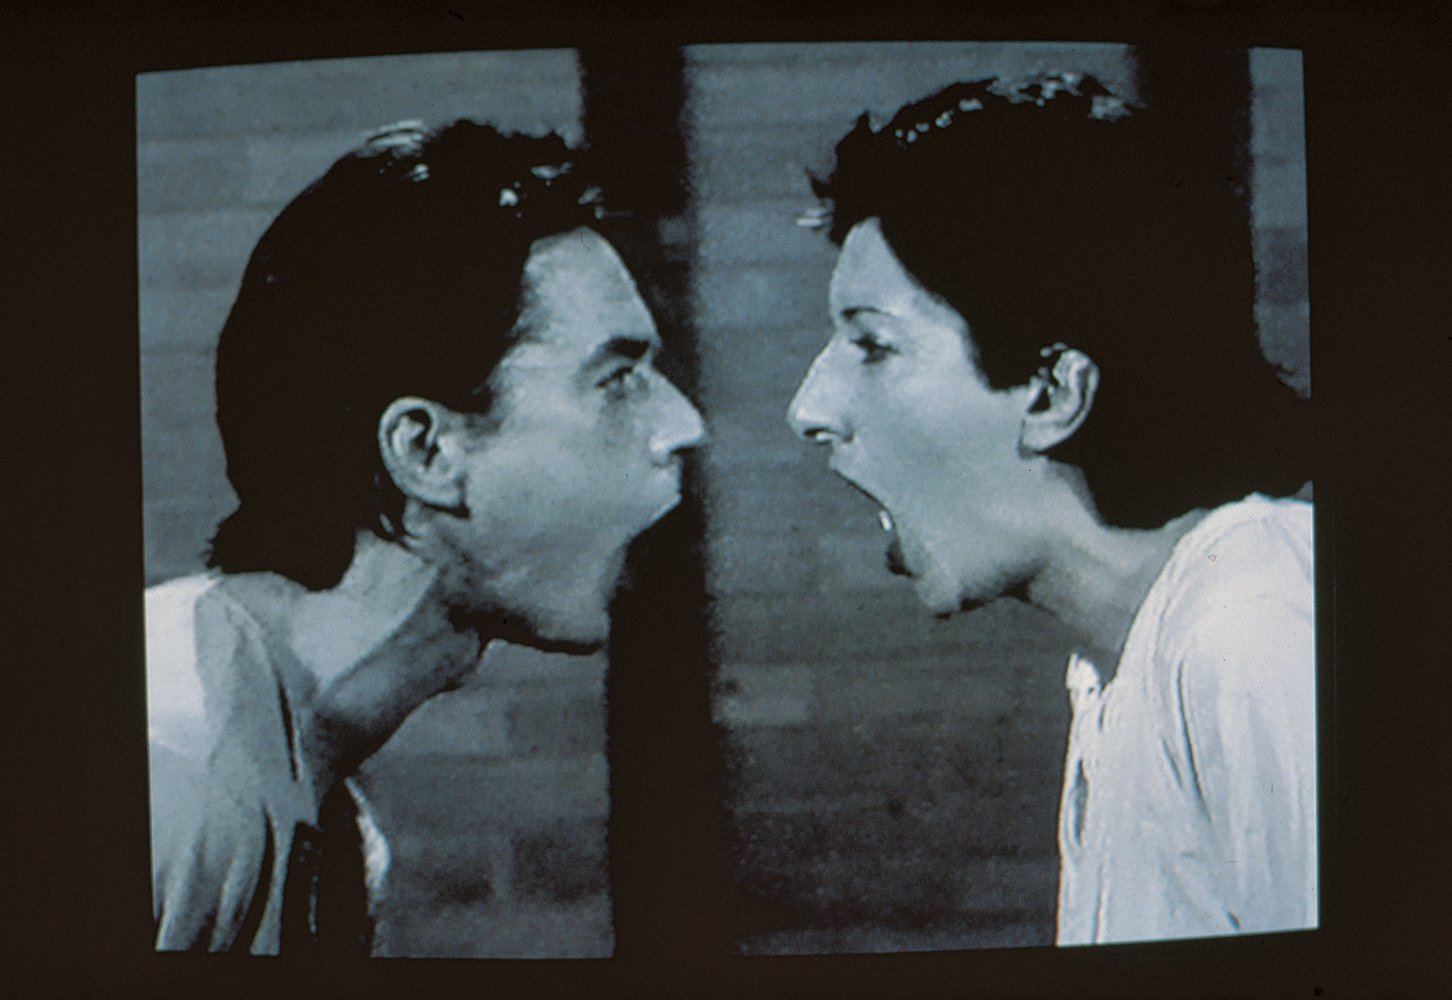 Marina Abramović and Ulay: relive the art couple’s most memorable performances